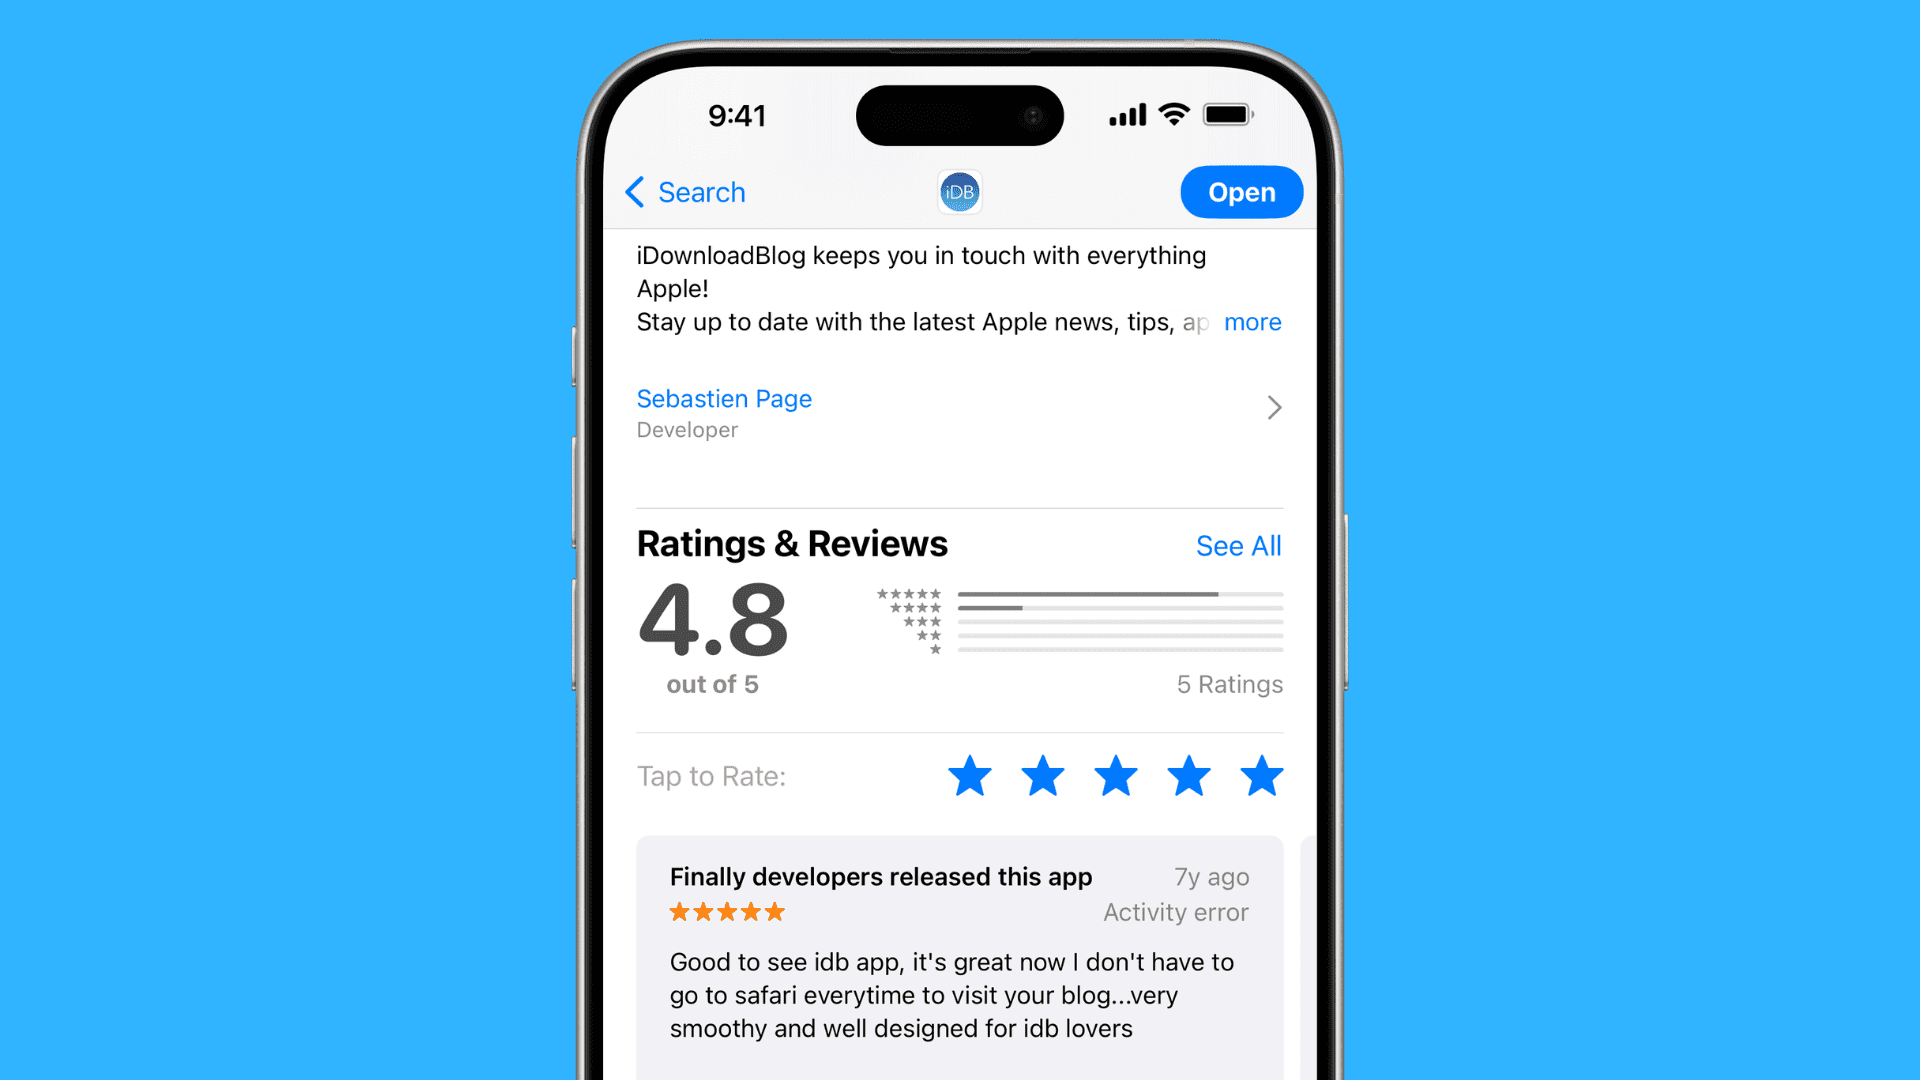 User reviews for an app on iPhone App Store